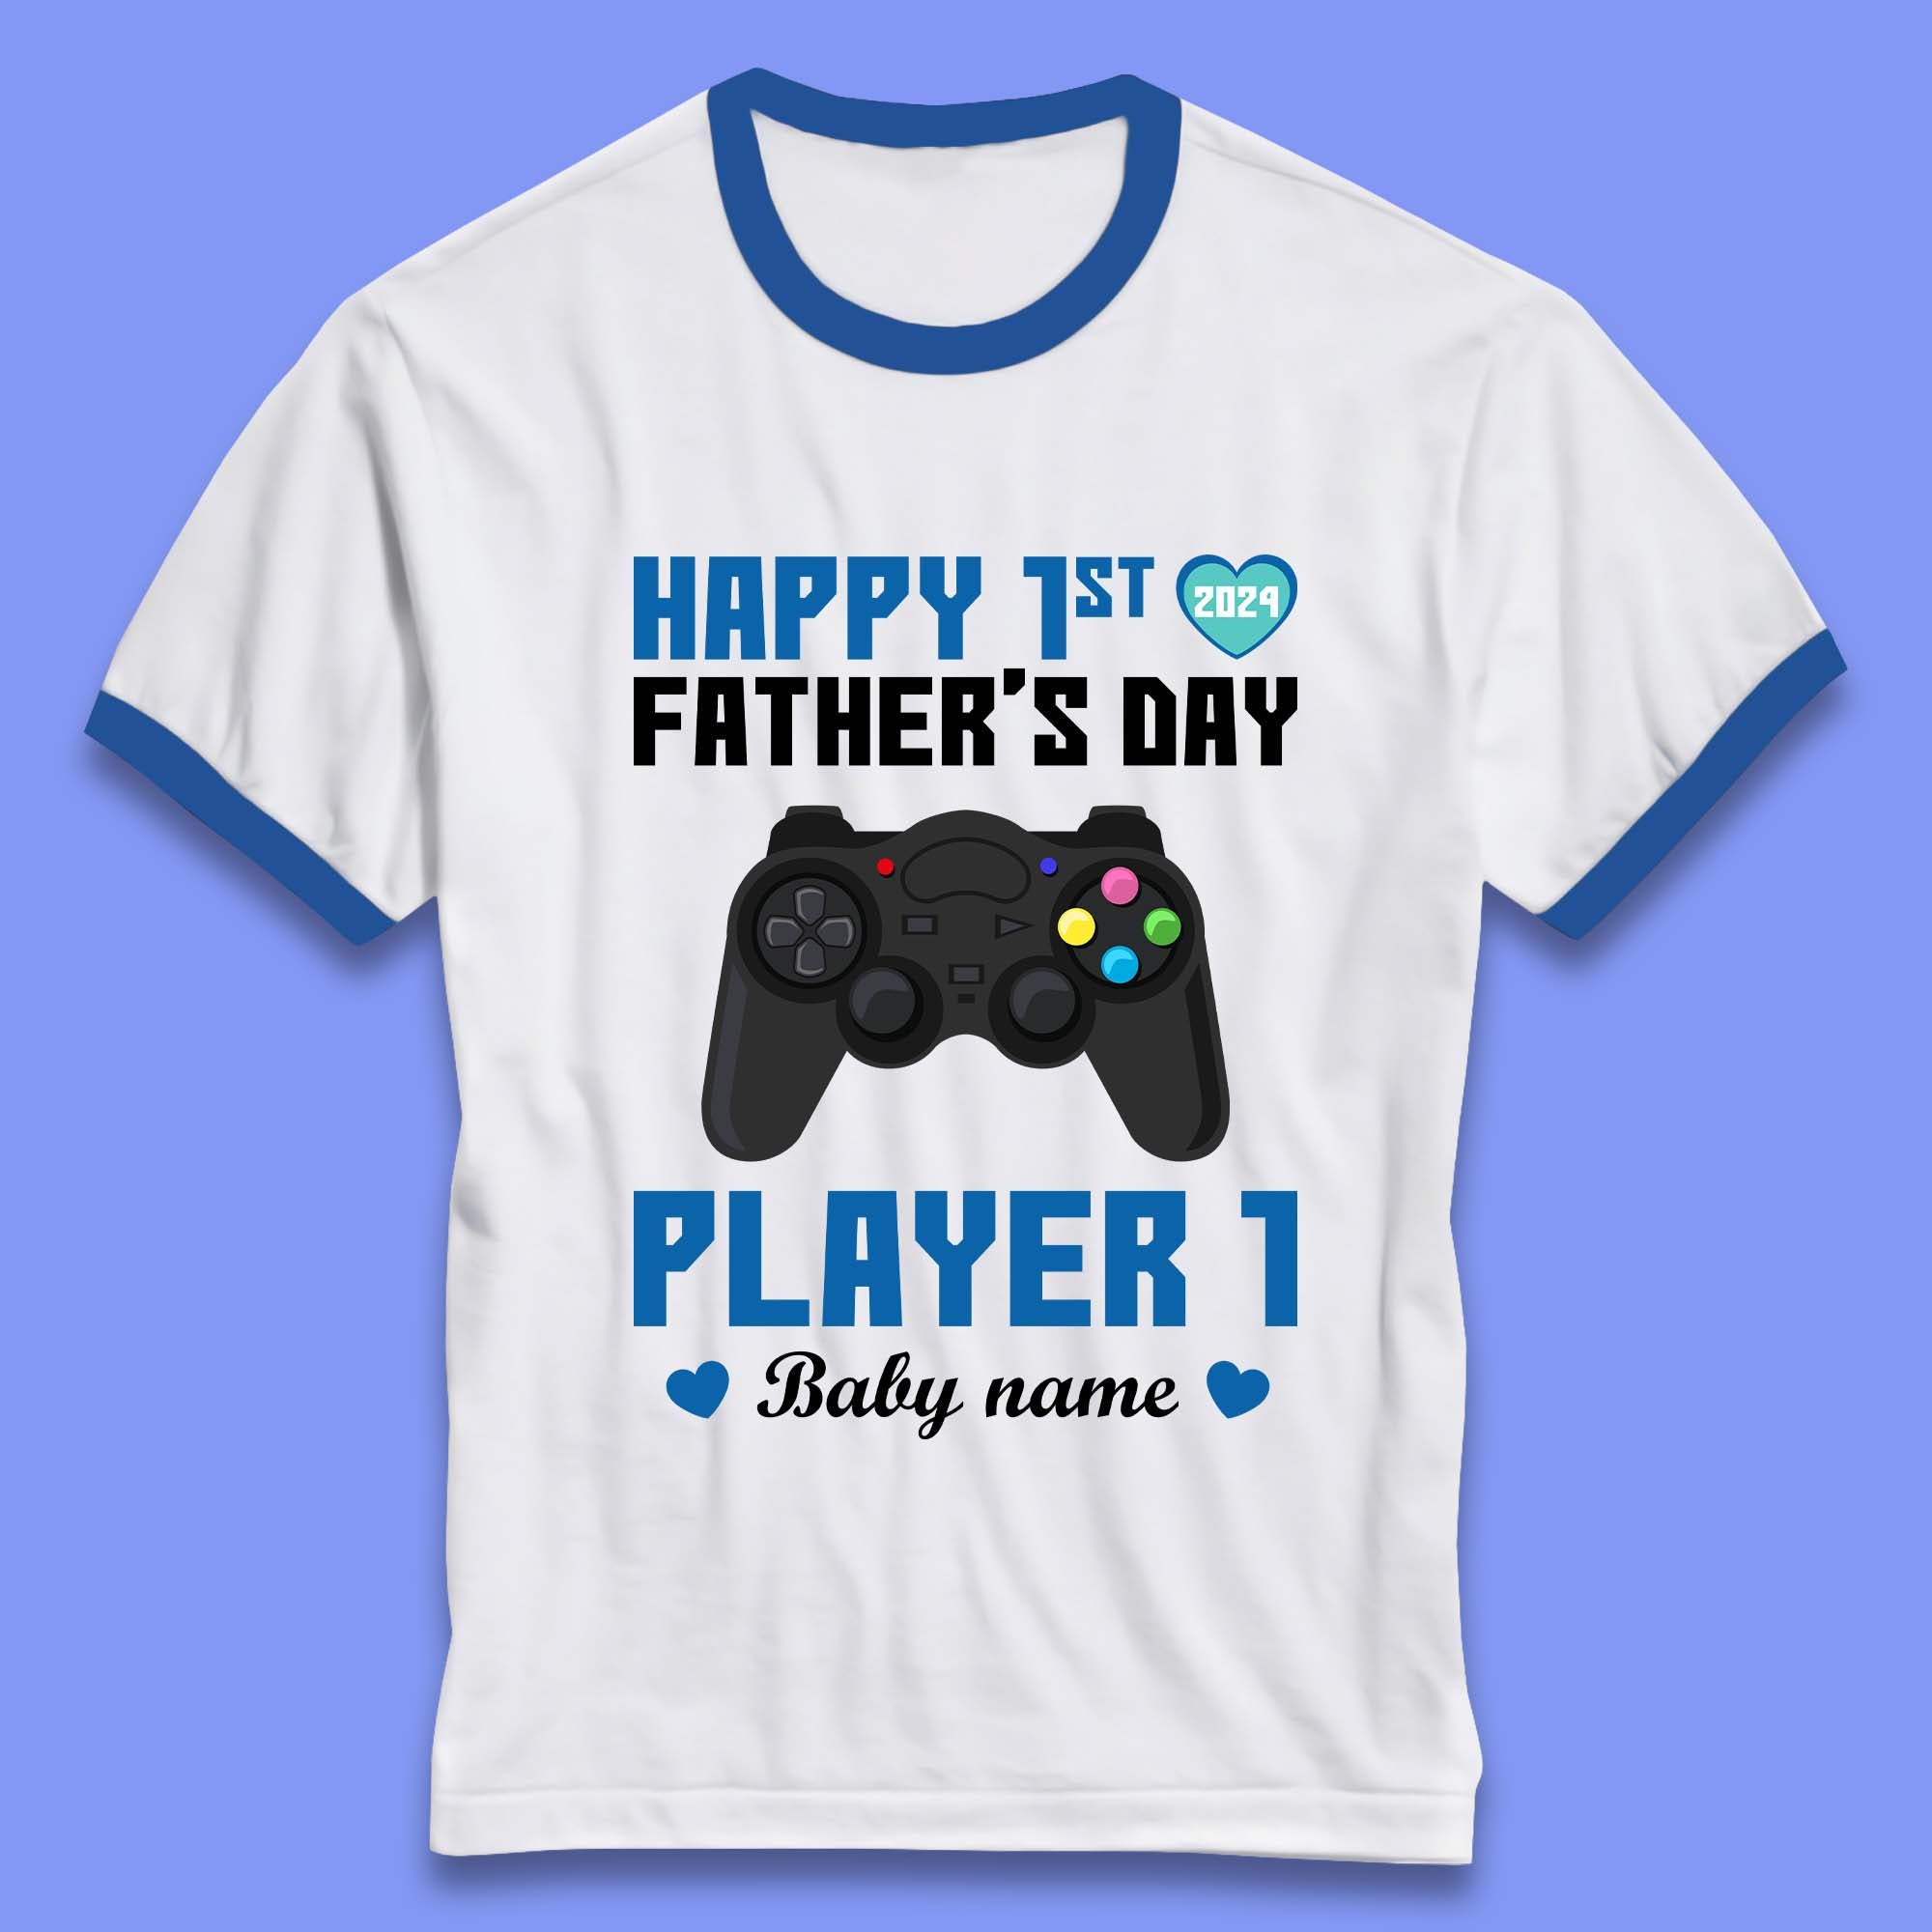 Personalised Happy First Father's Day Ringer T-Shirt